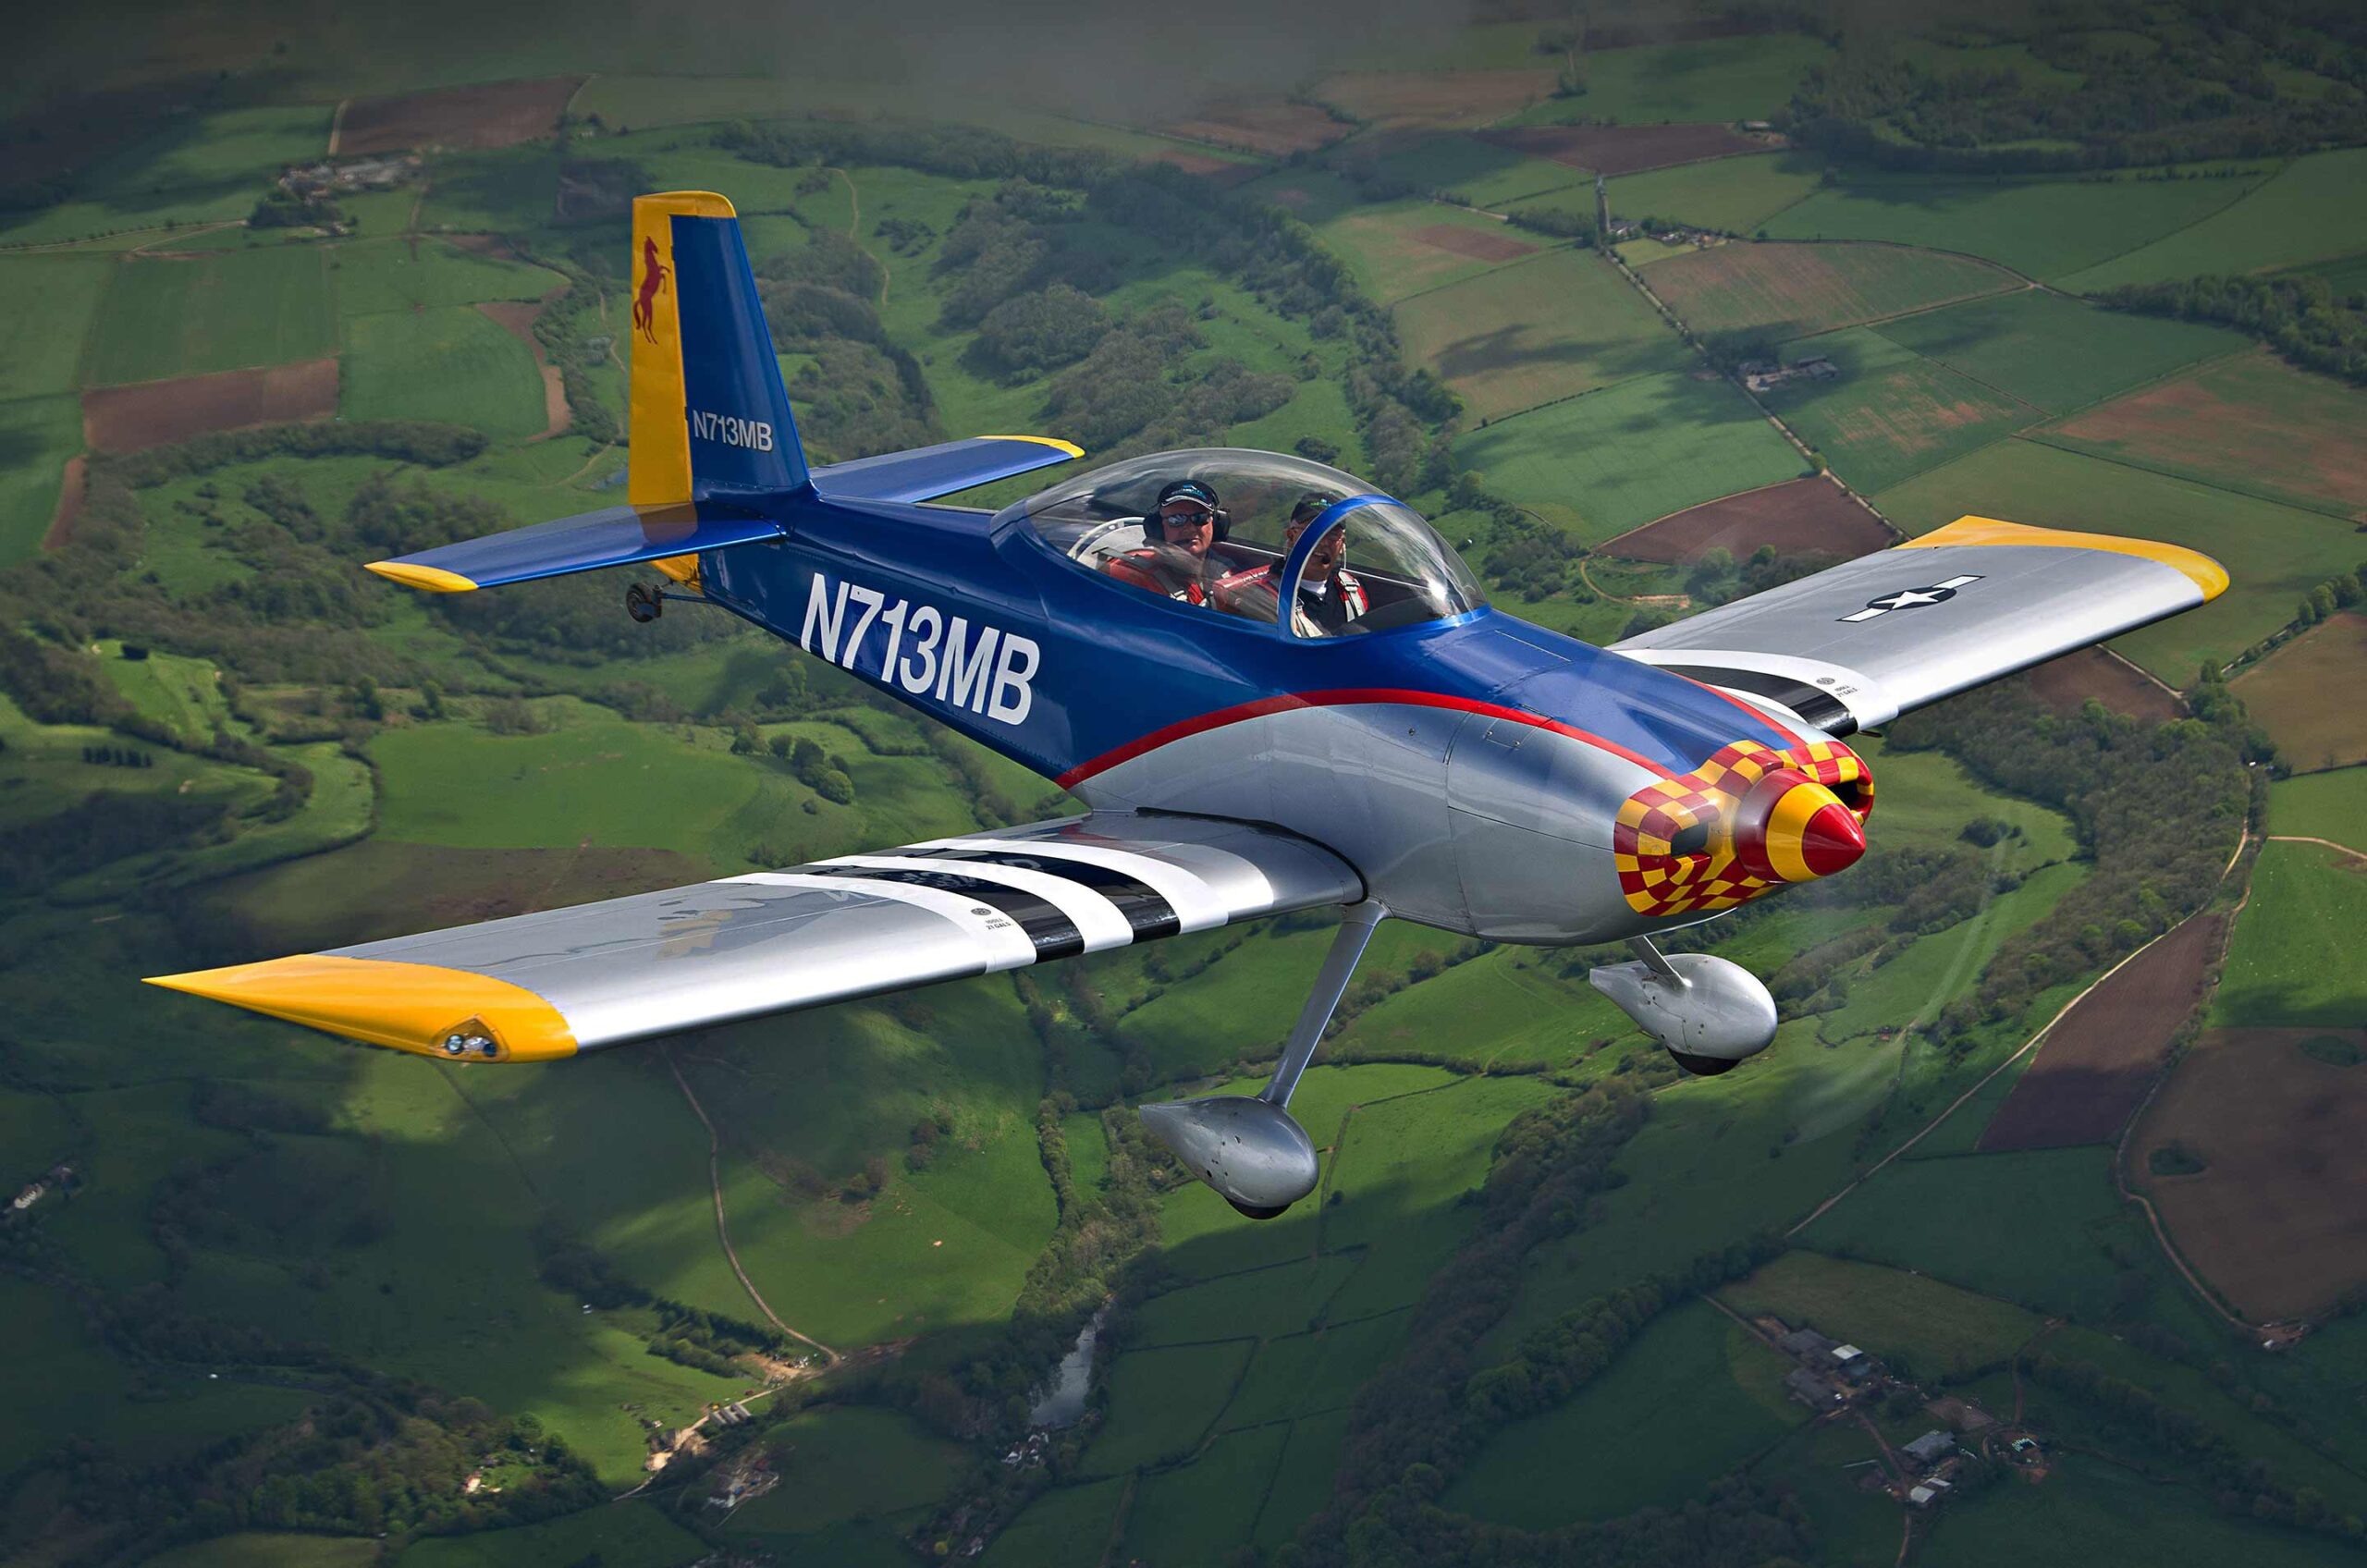 Why the RV-8?